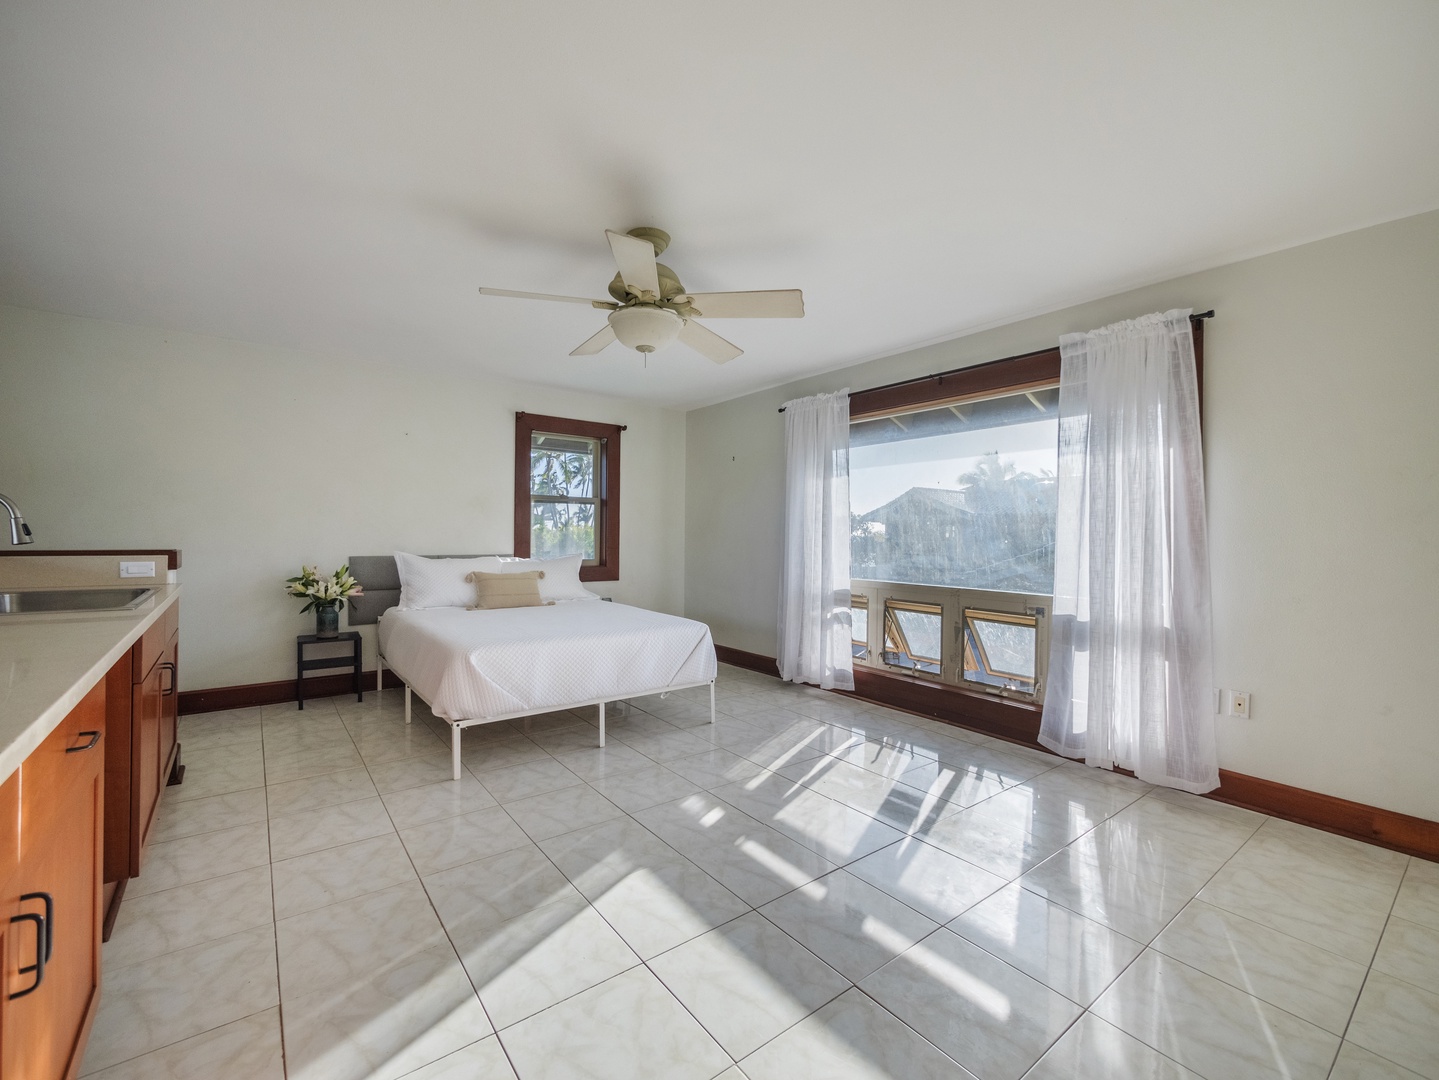 Waianae Vacation Rentals, Konishiki Beachhouse - Spacious guest suite with a nice and airy ambiance.